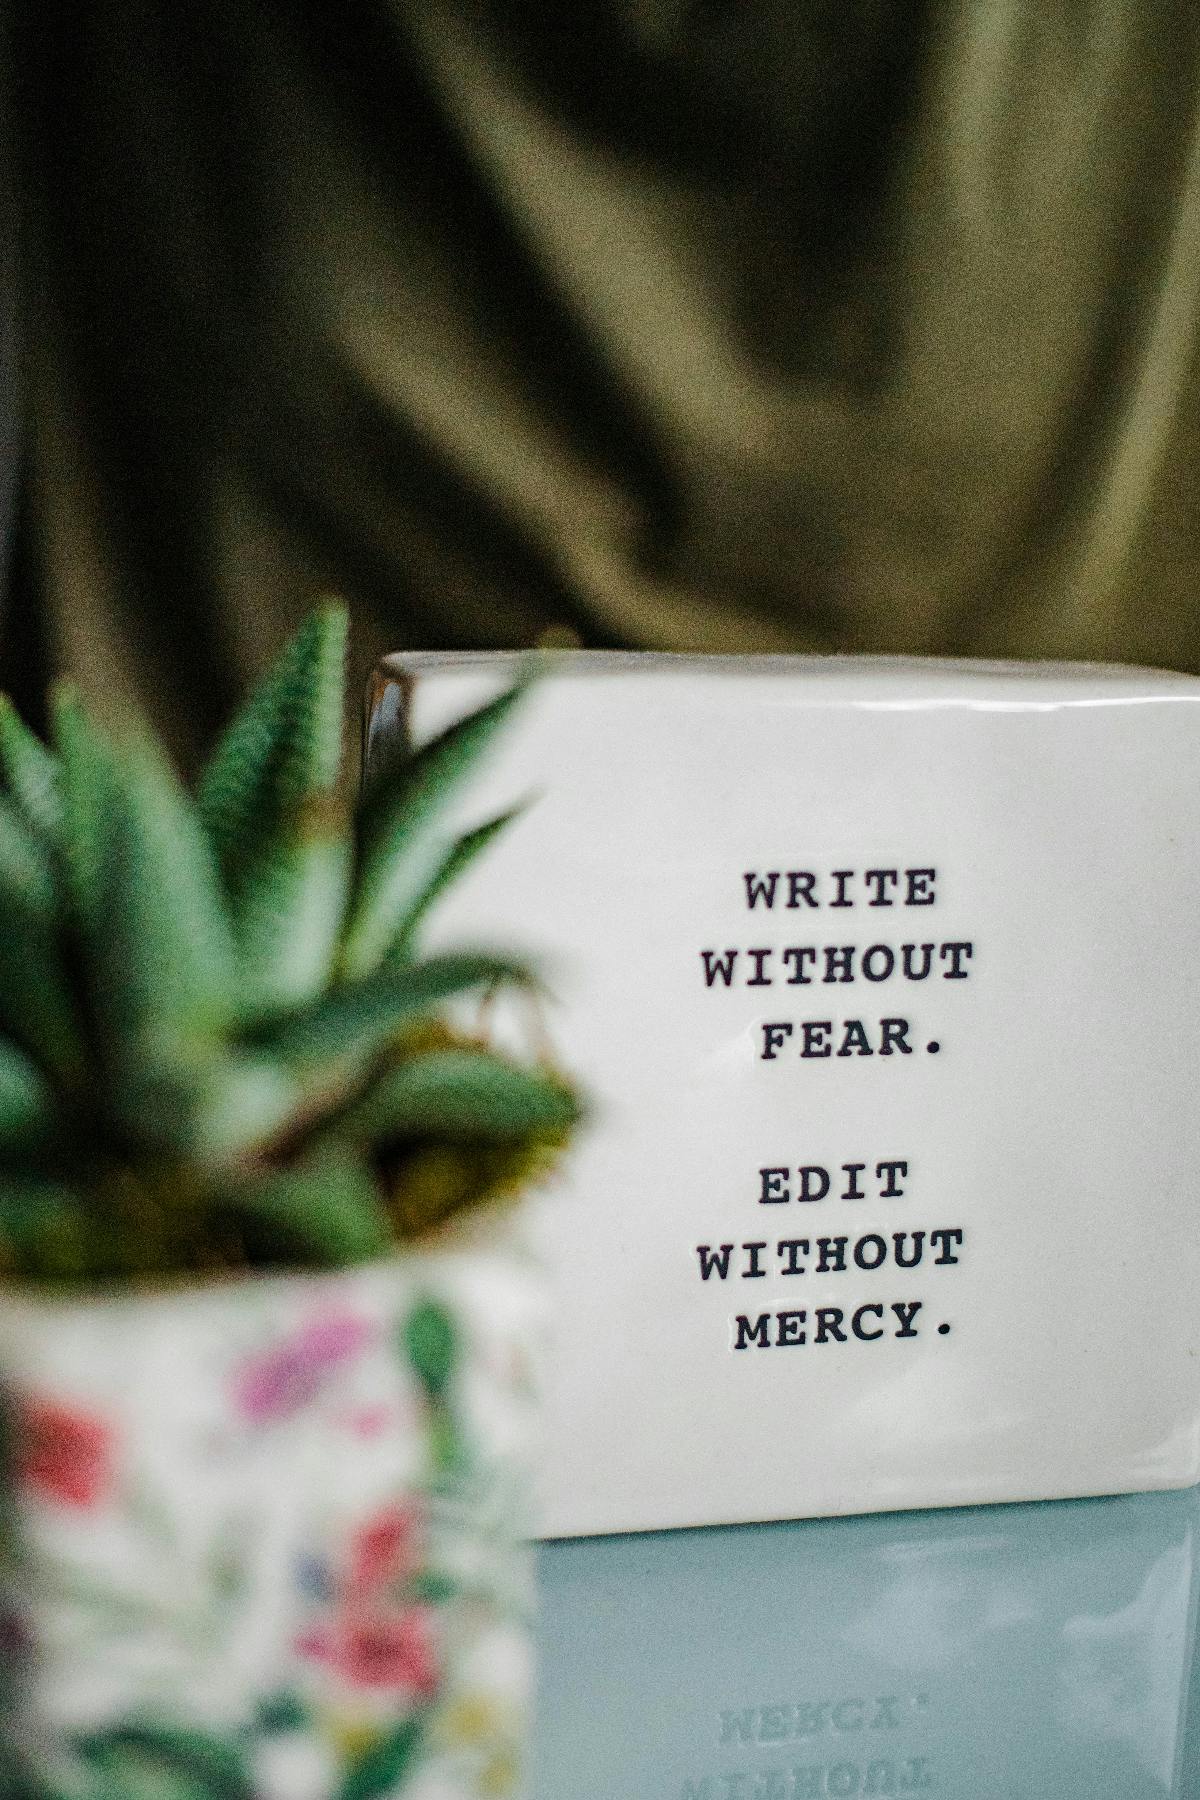 an encourgaing note for writers; write without fear, edit without mercy